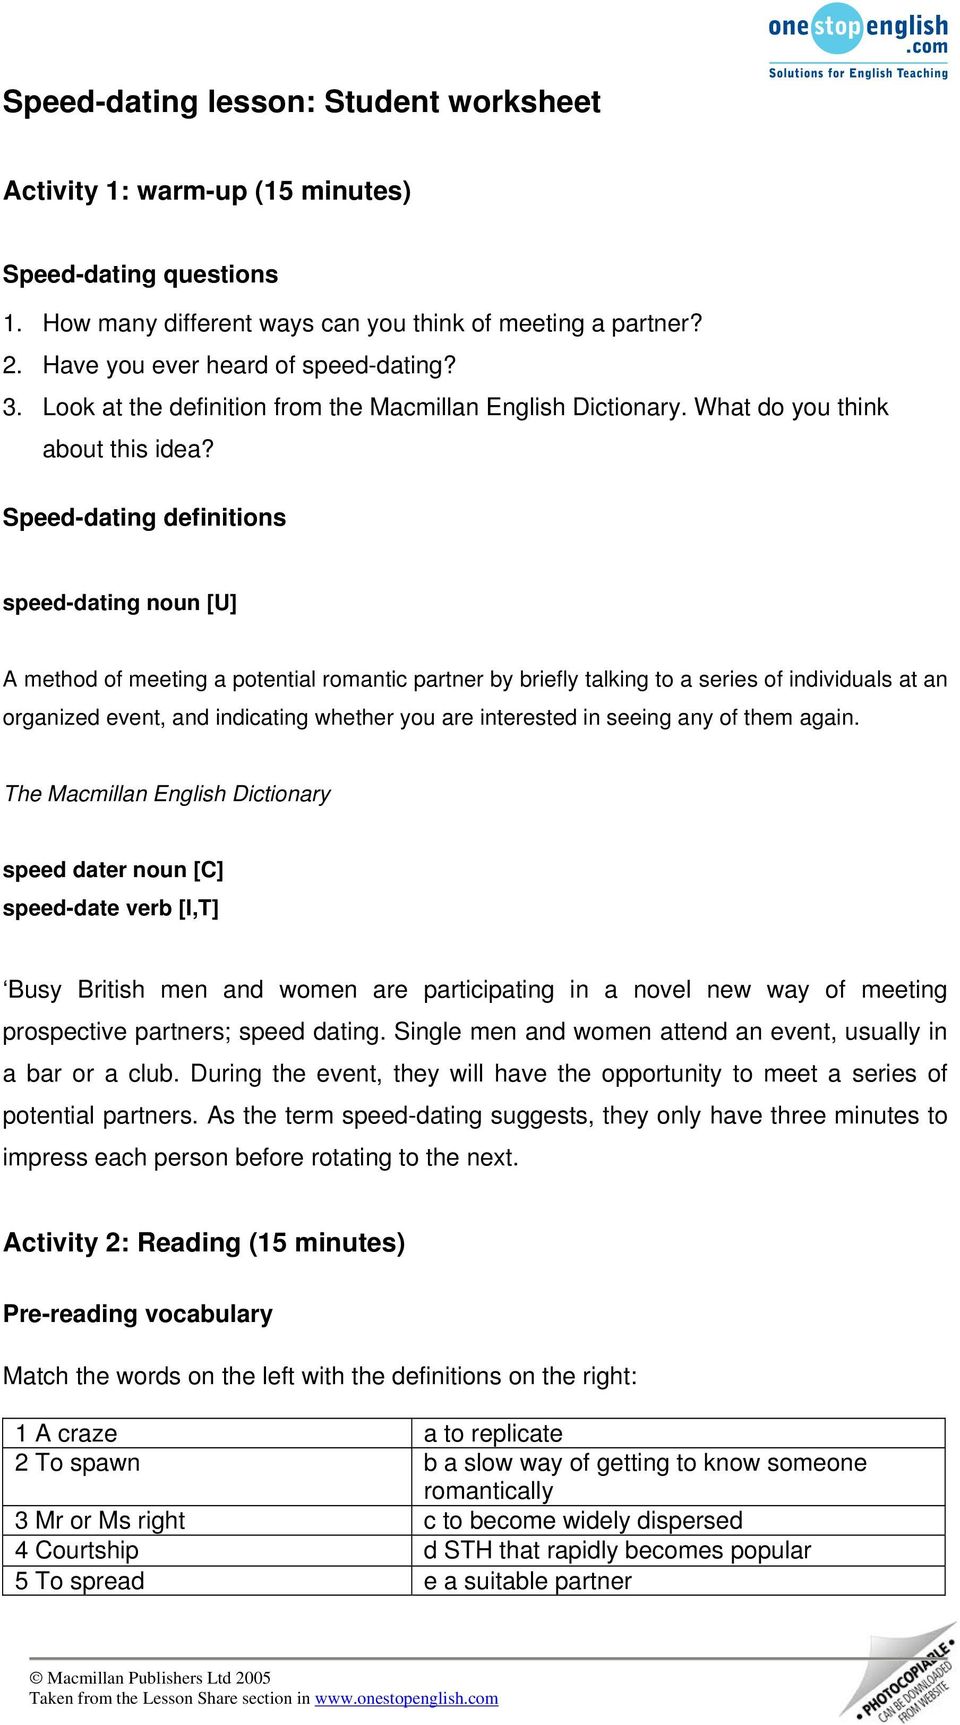 One stop english speed dating